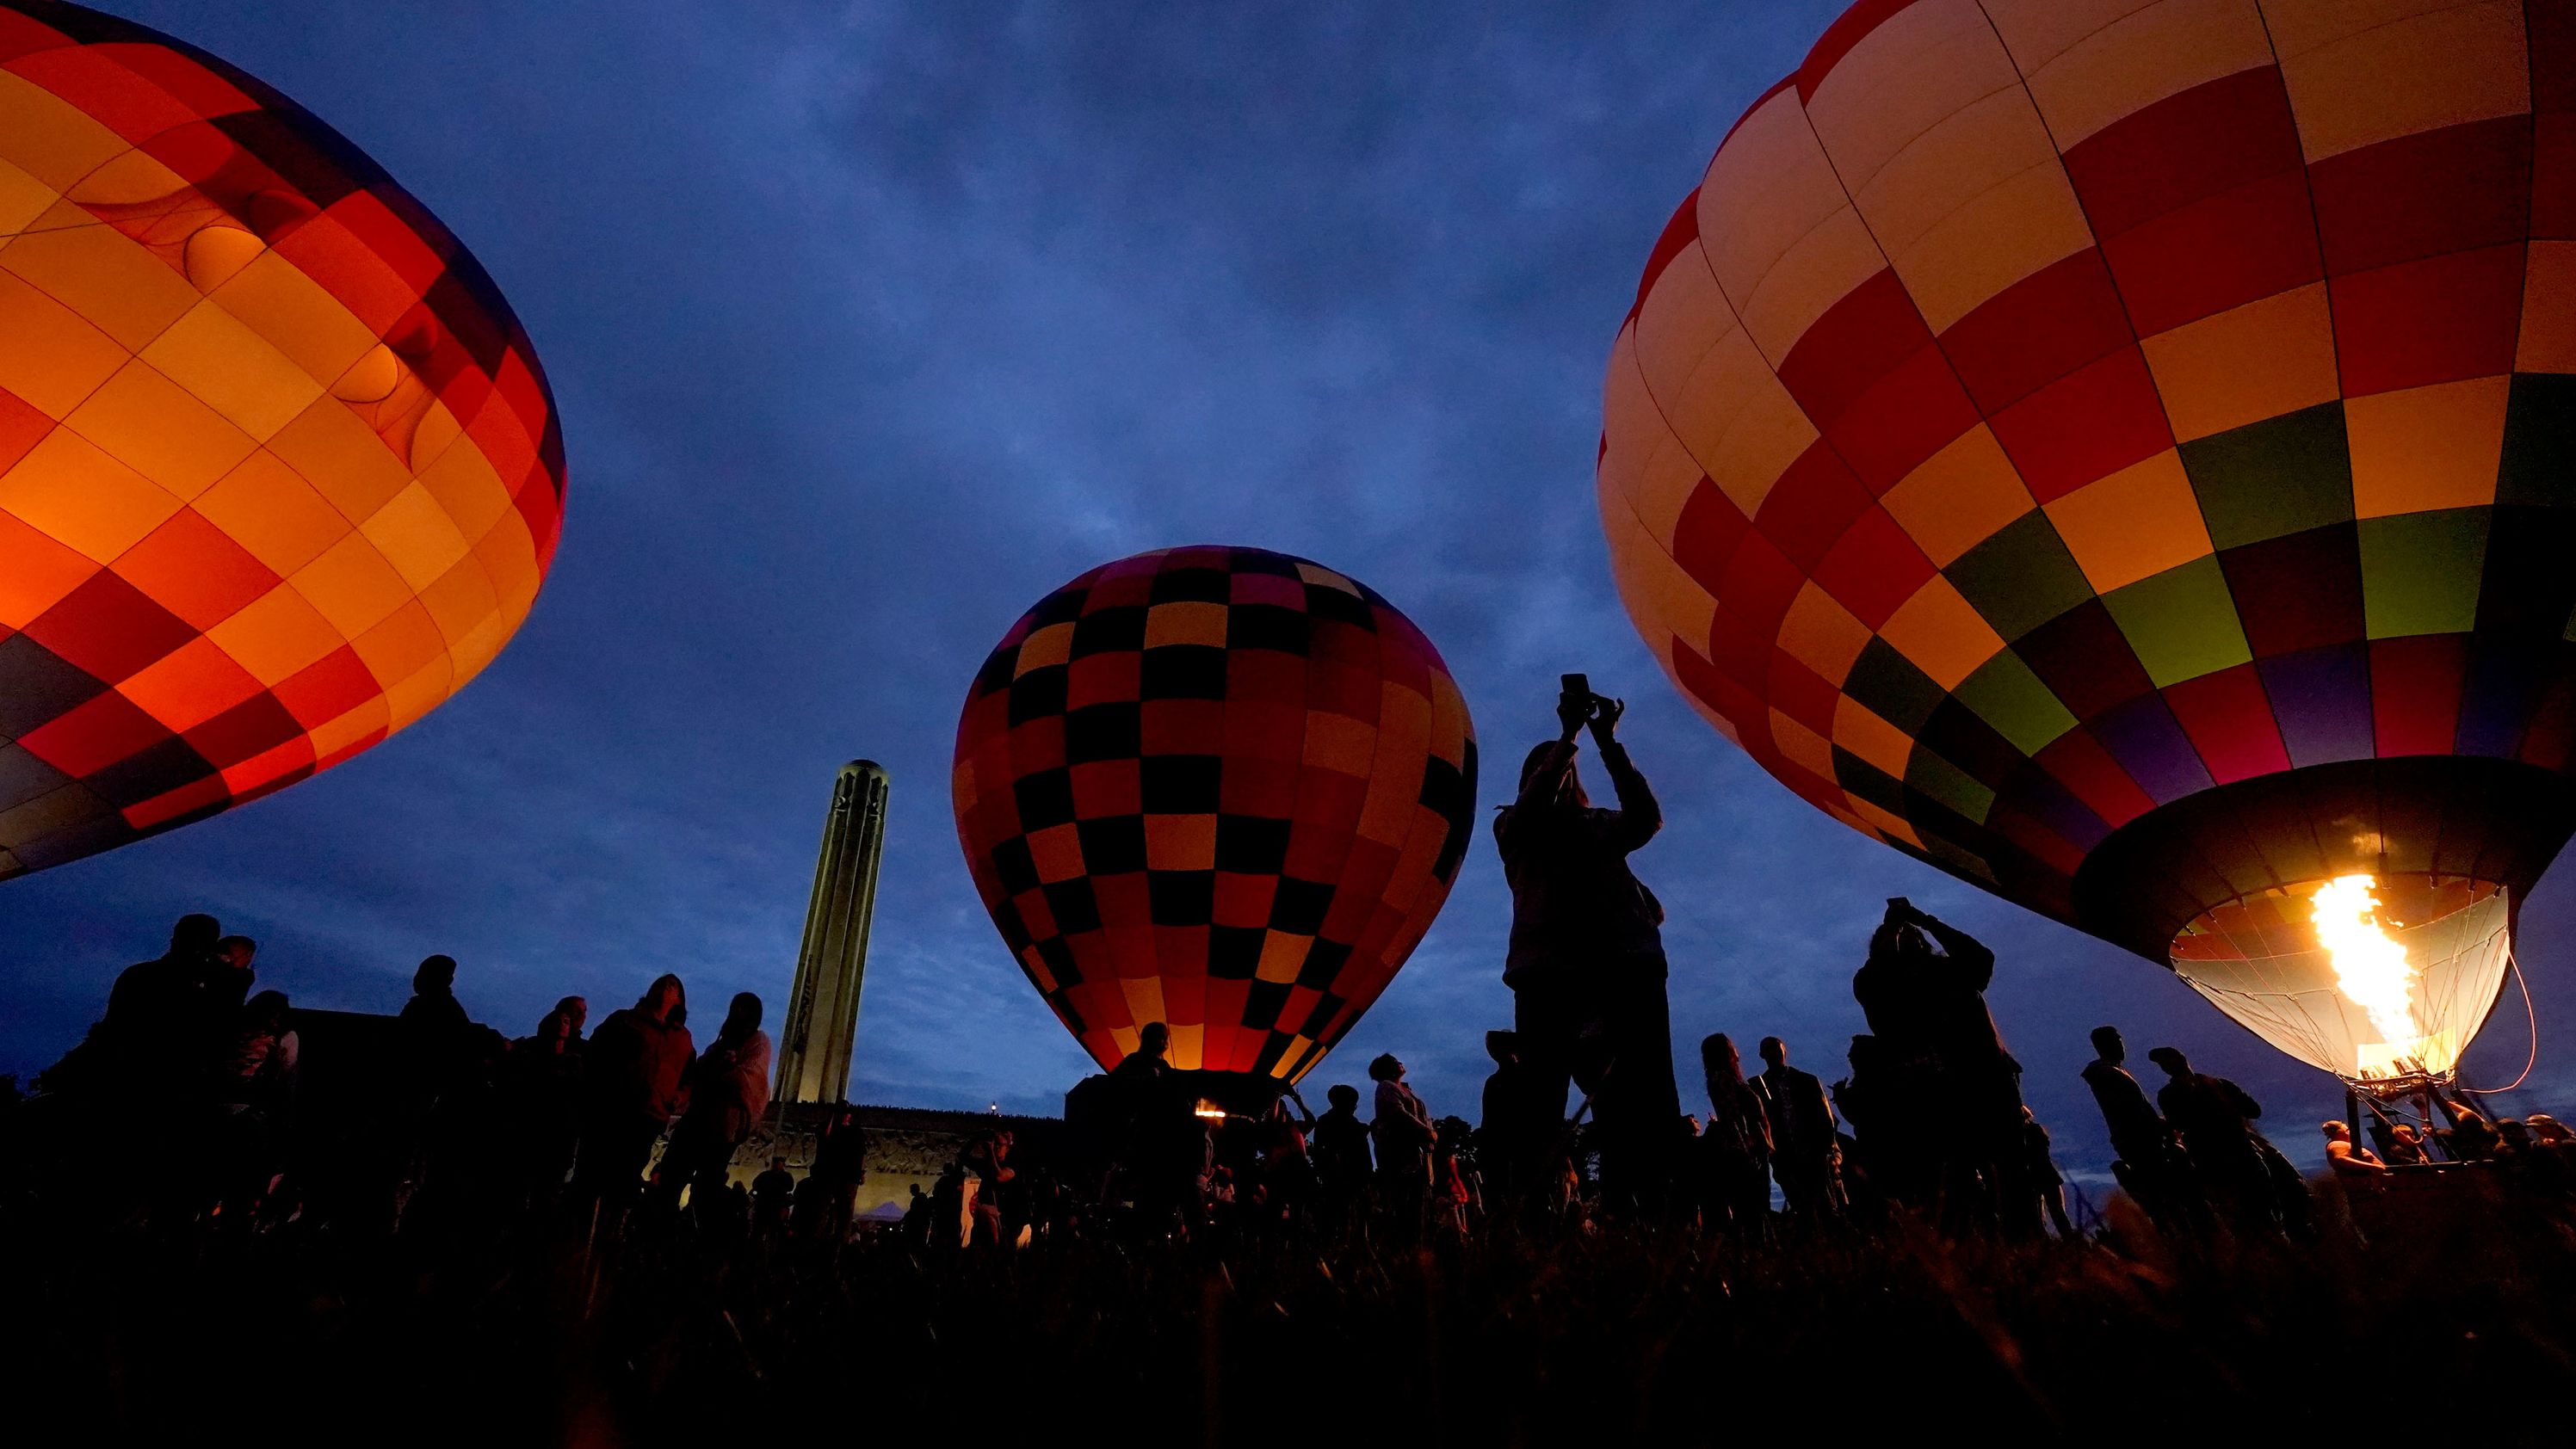 Hot-air balloons dominated the field Sunday in front of the National World War I Museum and Memorial in Kansas City, Missouri.